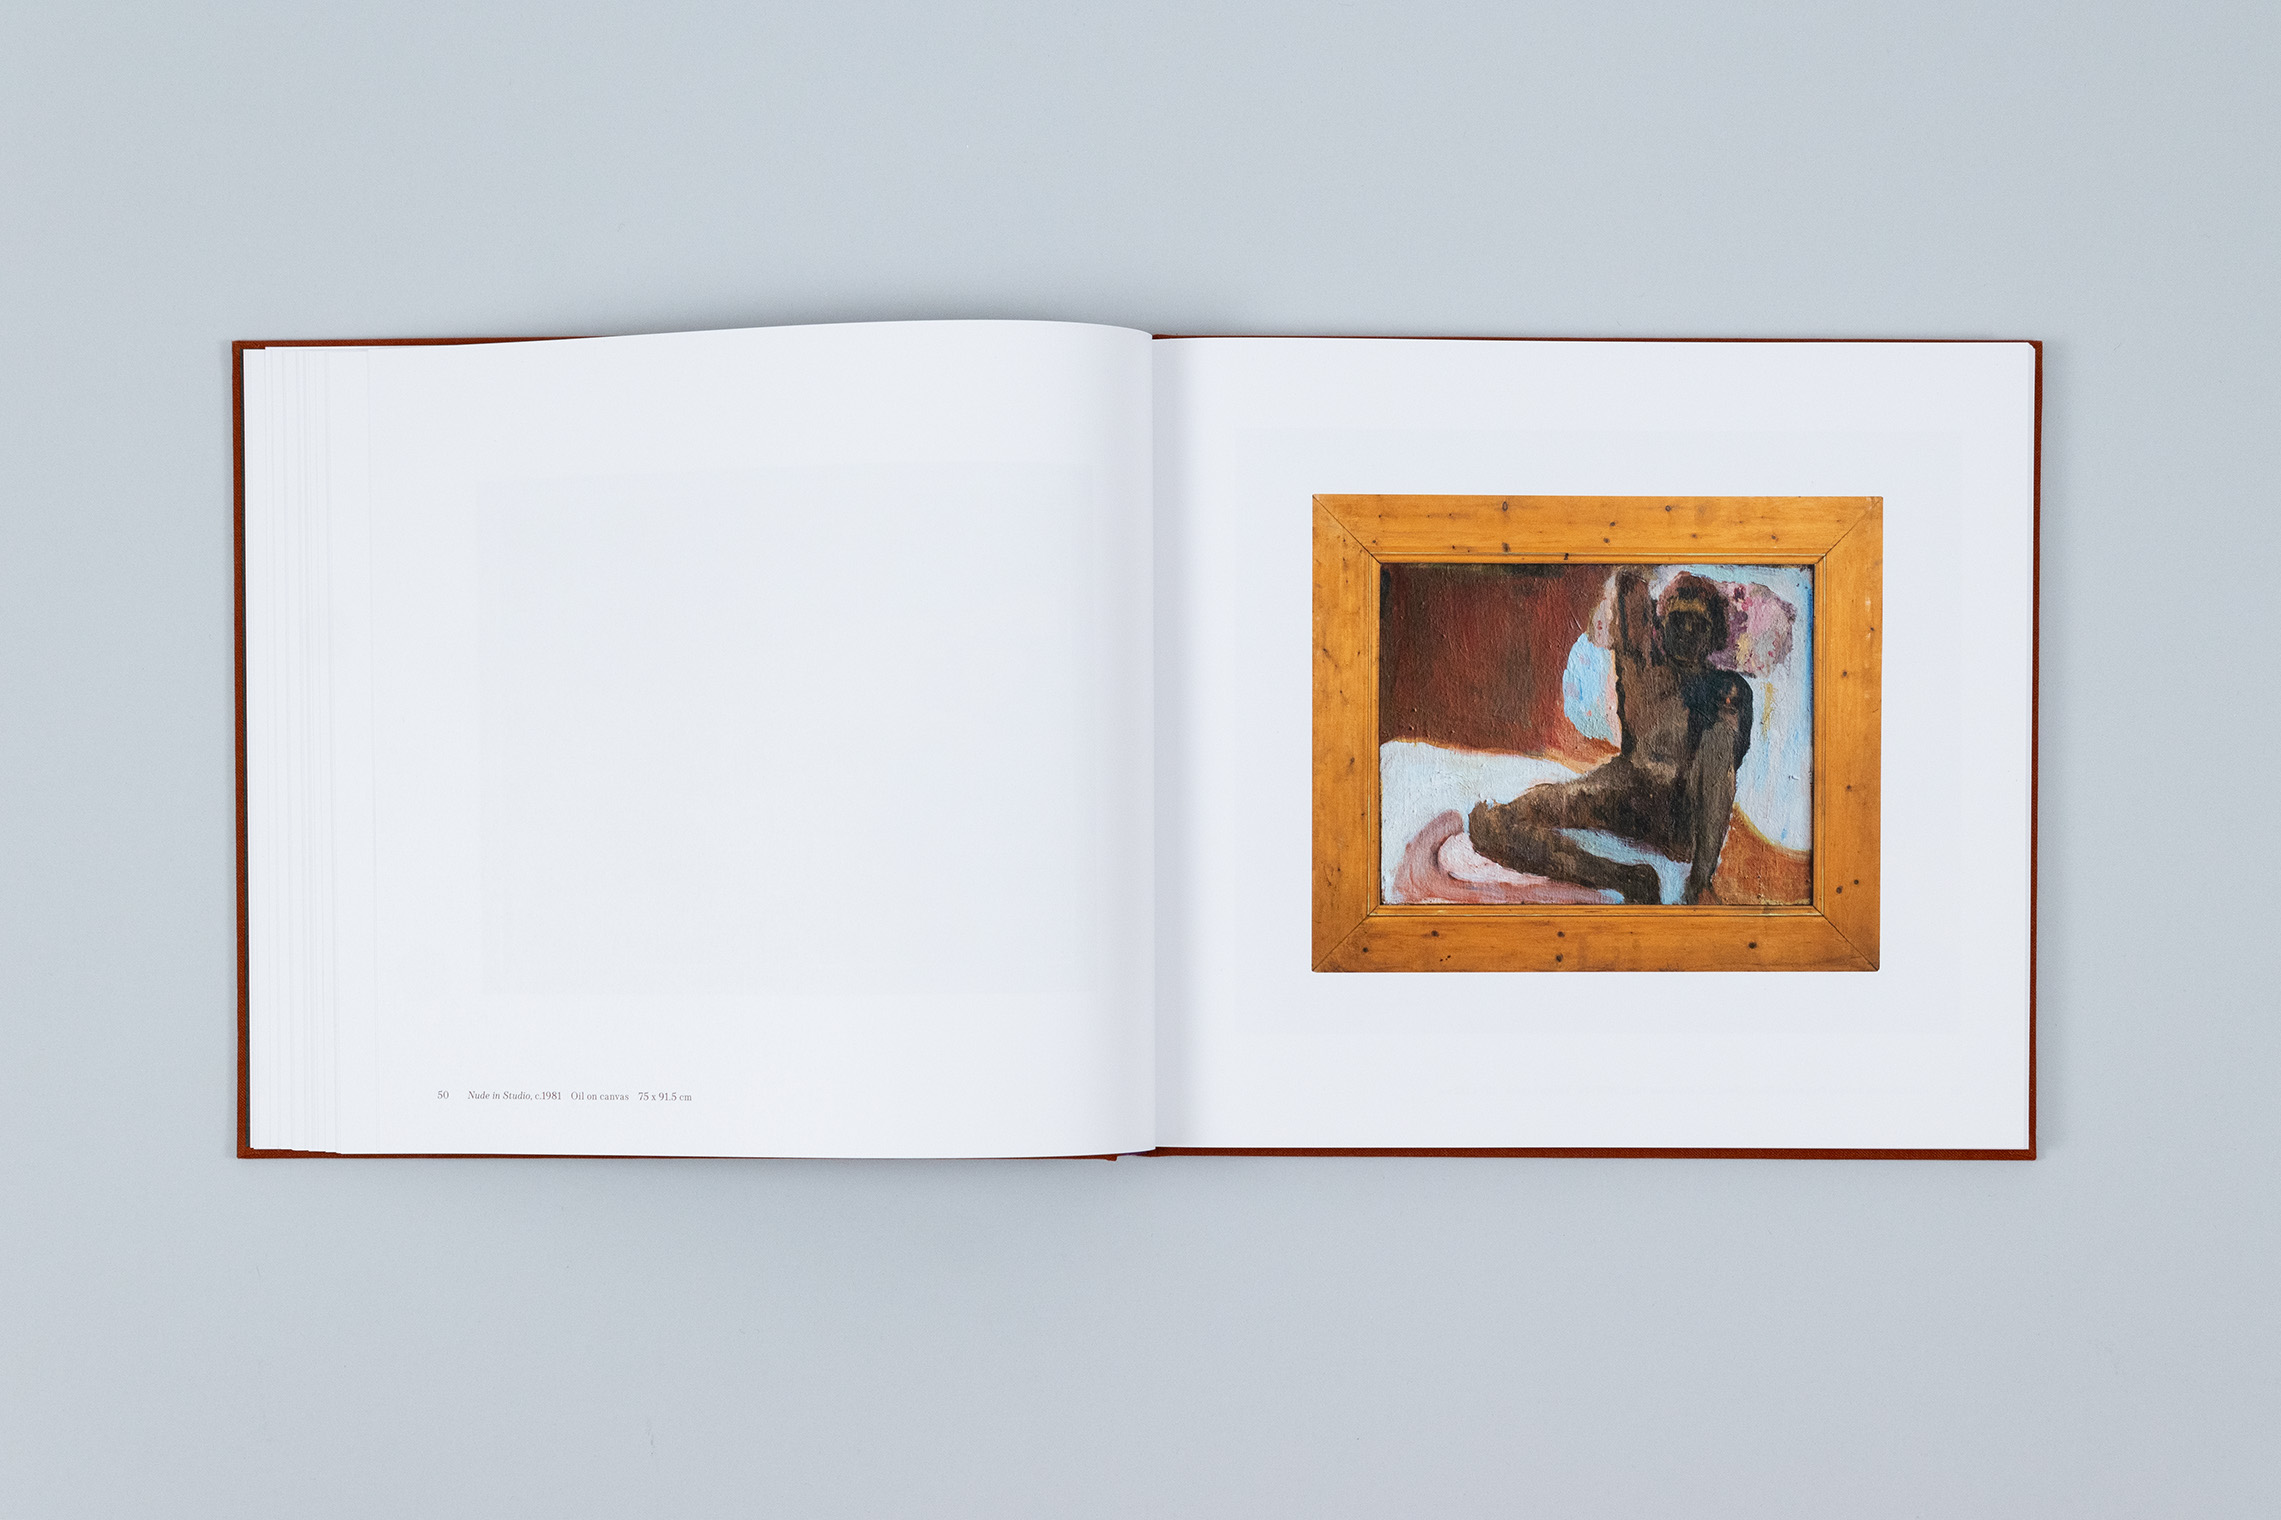 Carole Gibbons monograph spread showing an oil painting of a nude male life model, housed in a chunky wooden frame